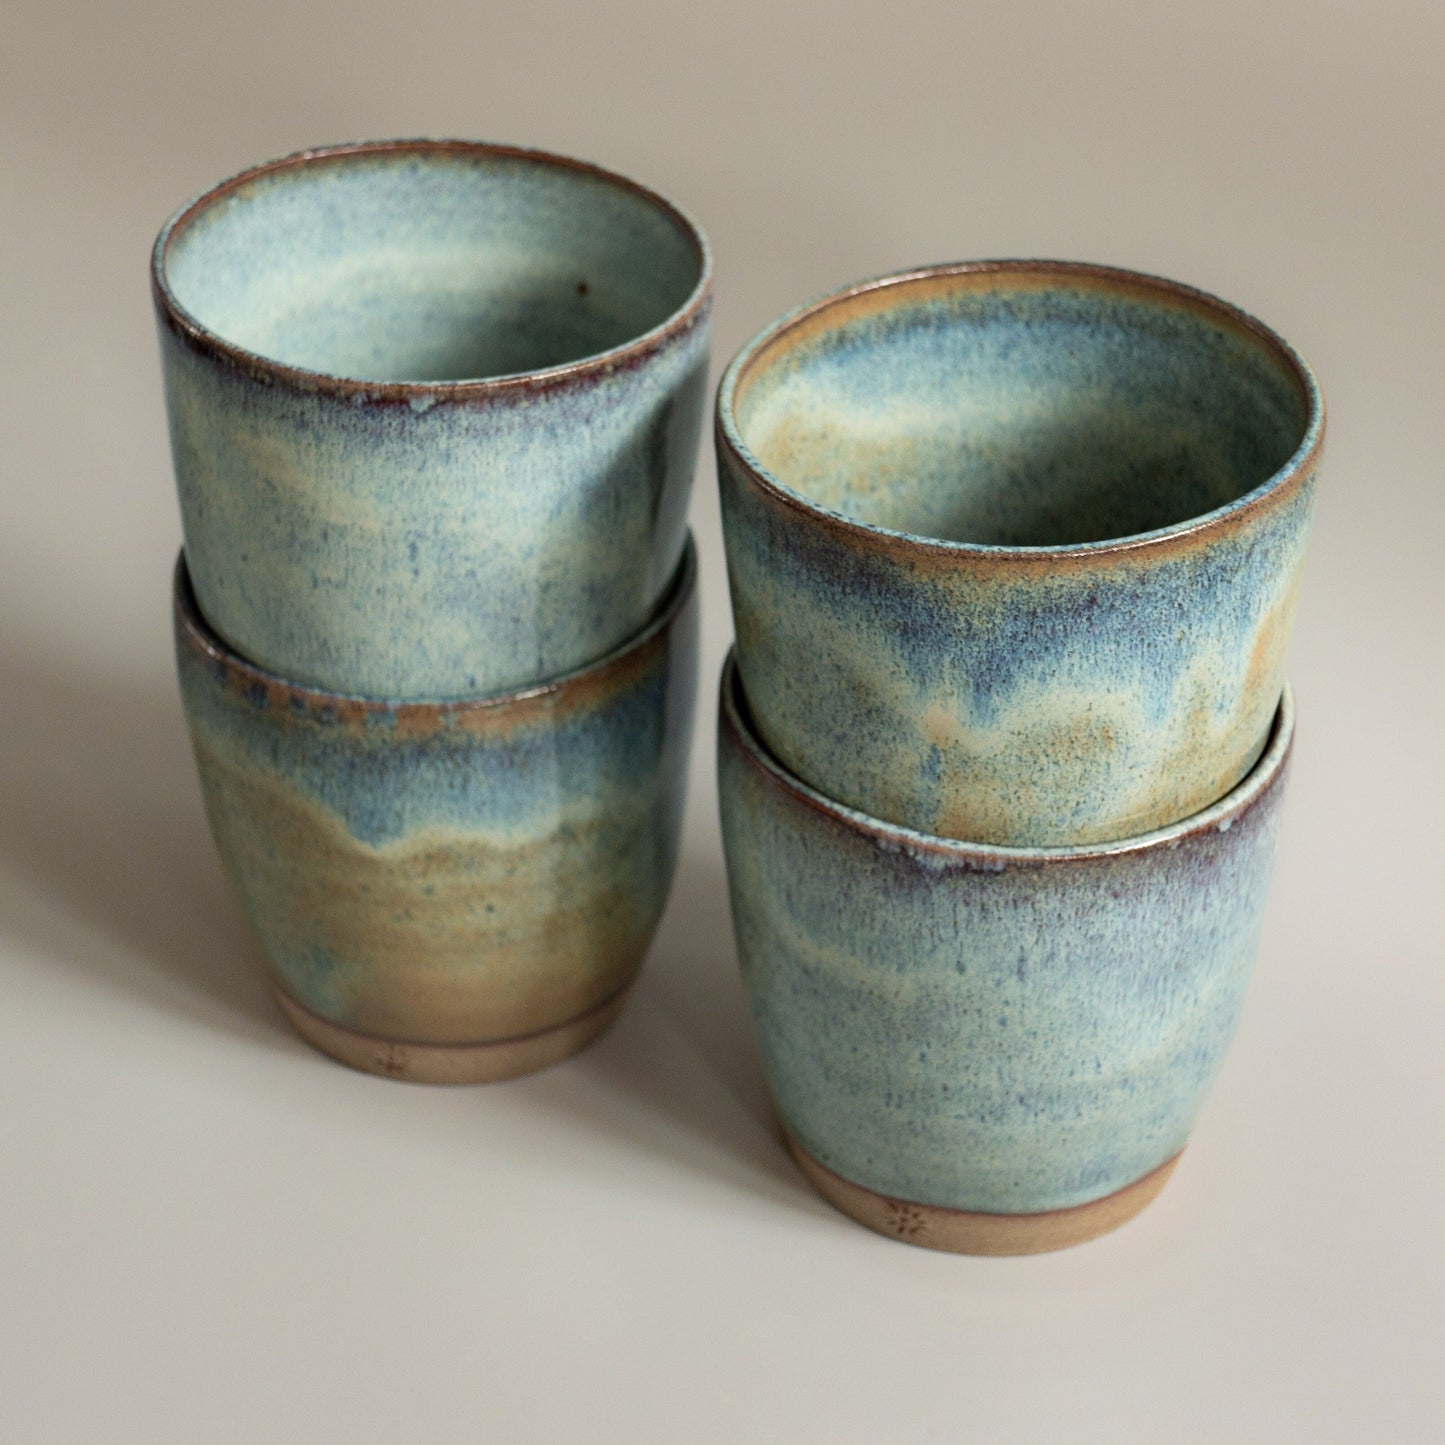 Tumbler thrown by hand in toasted stoneware clay.